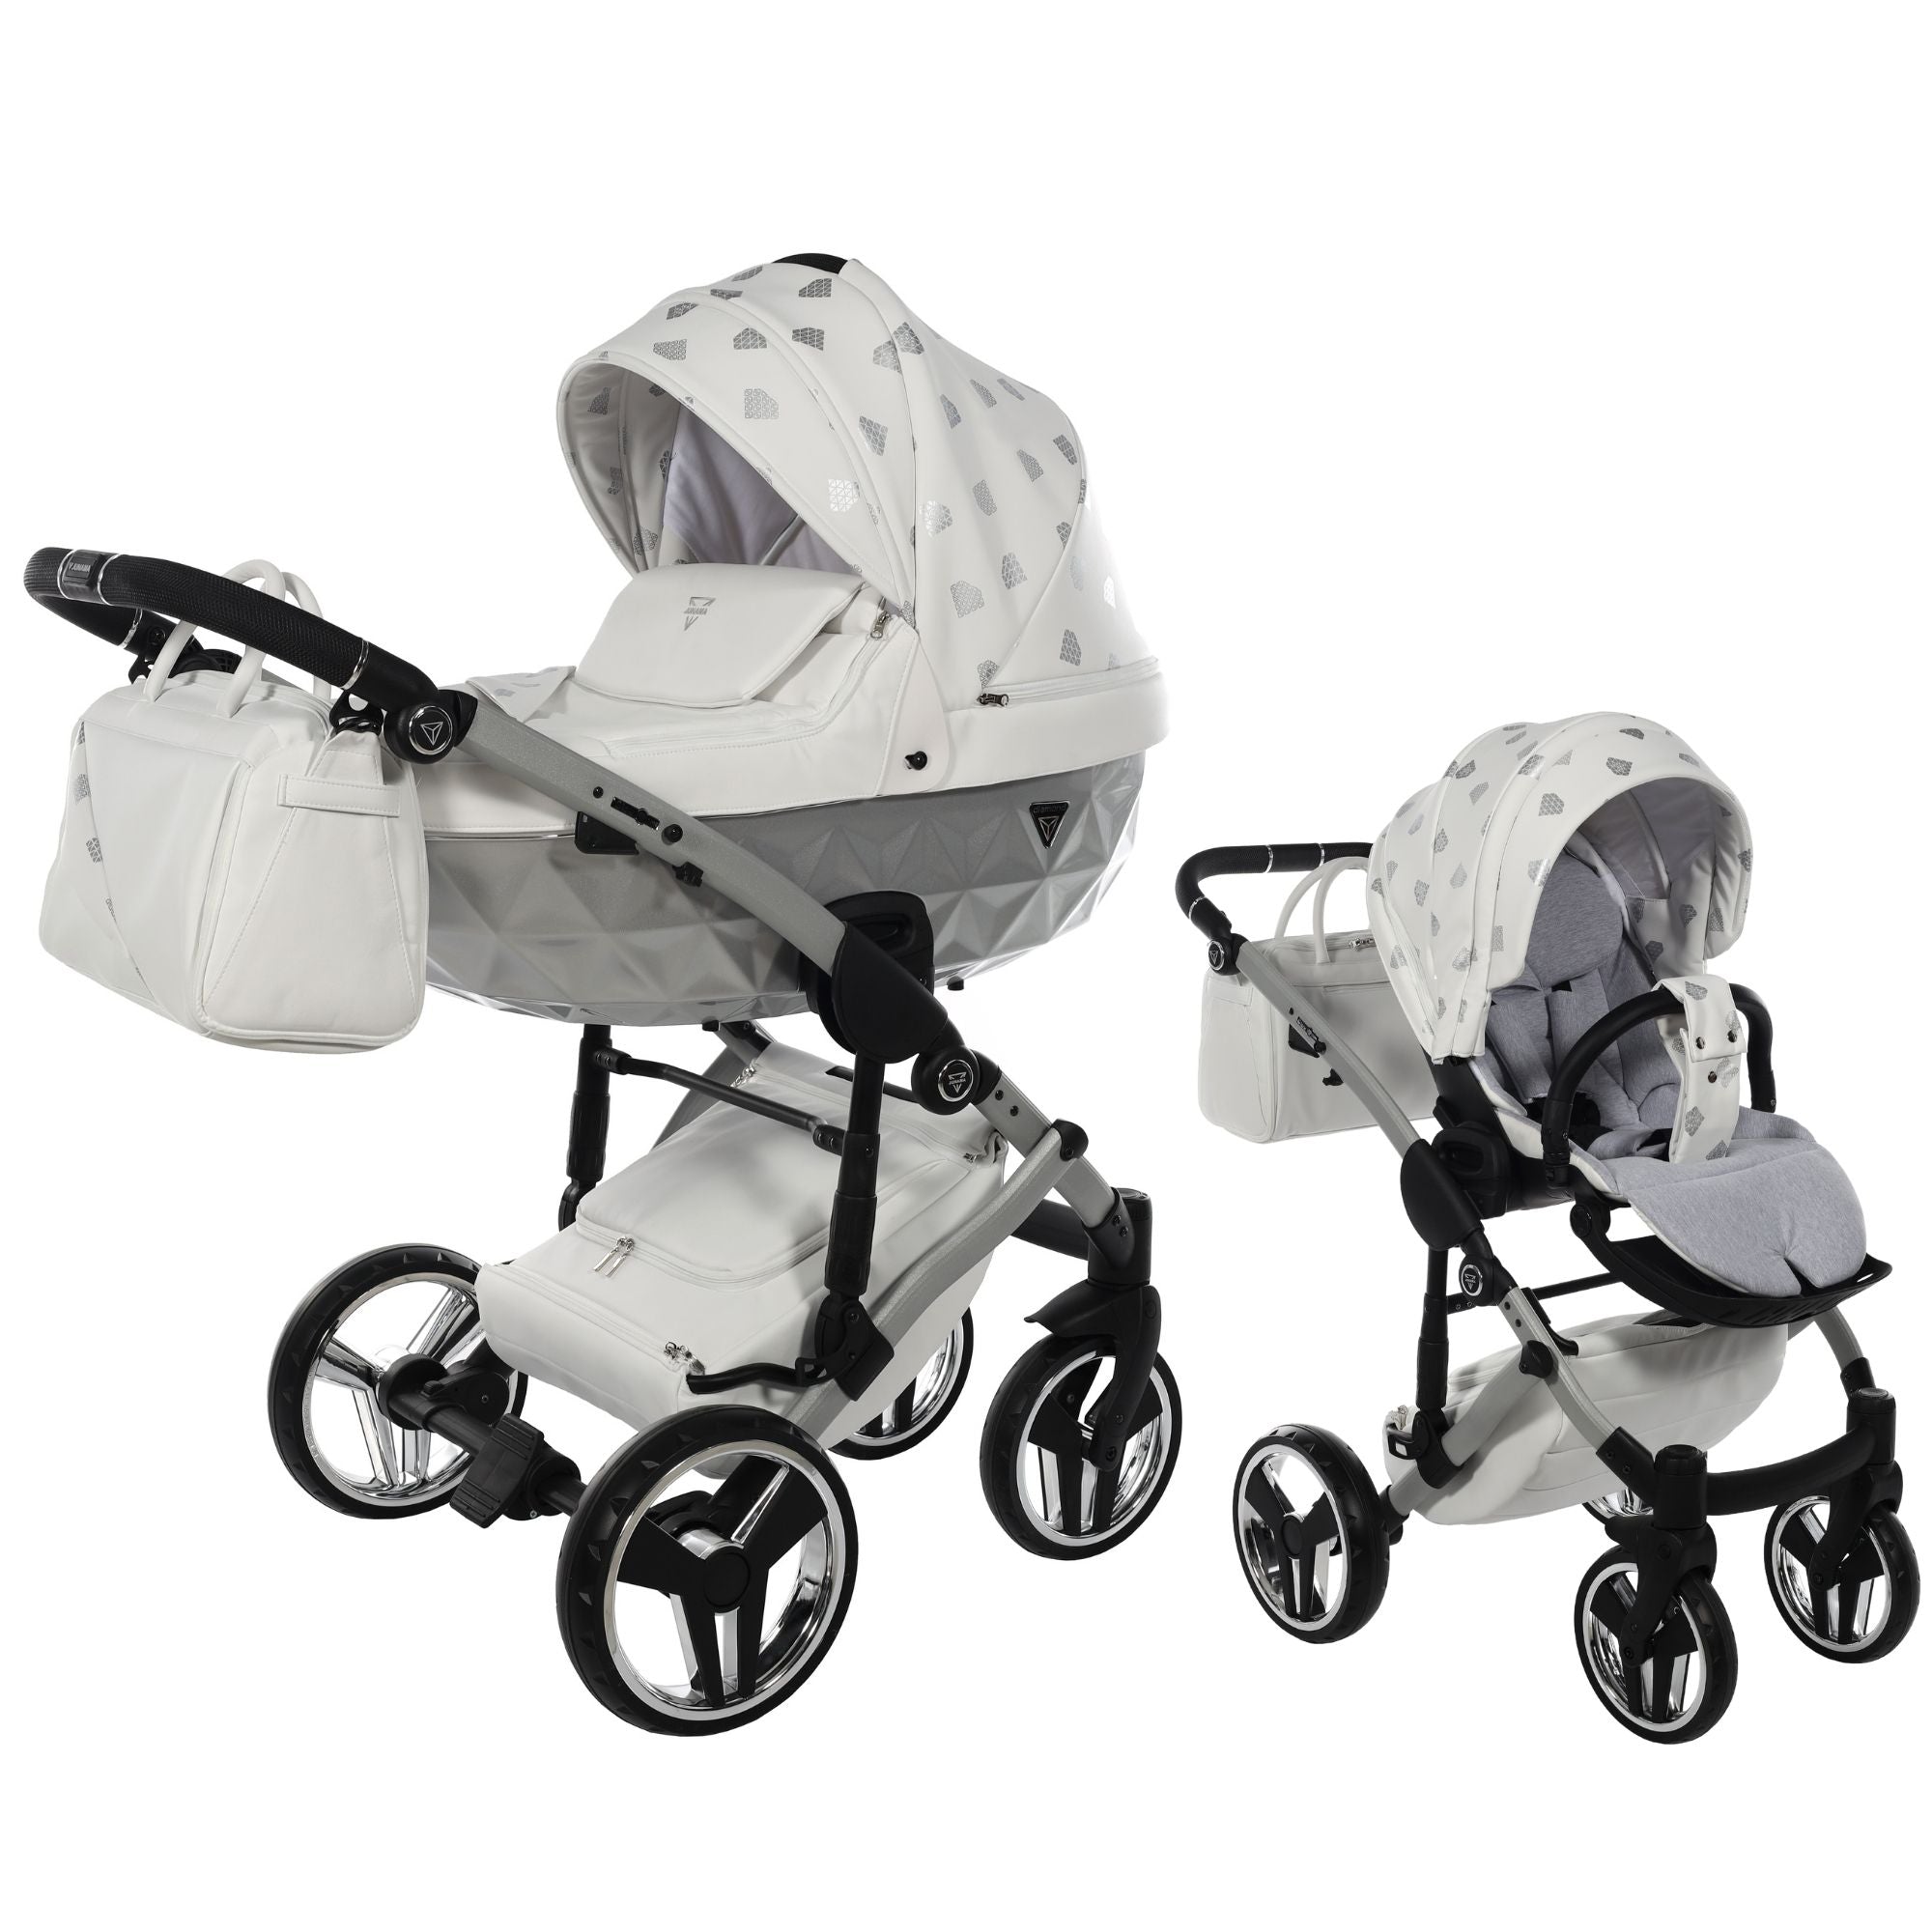 Junama GLOW, baby prams or stroller 2 in 1 - Silver and White, Code number: JUNGLW03